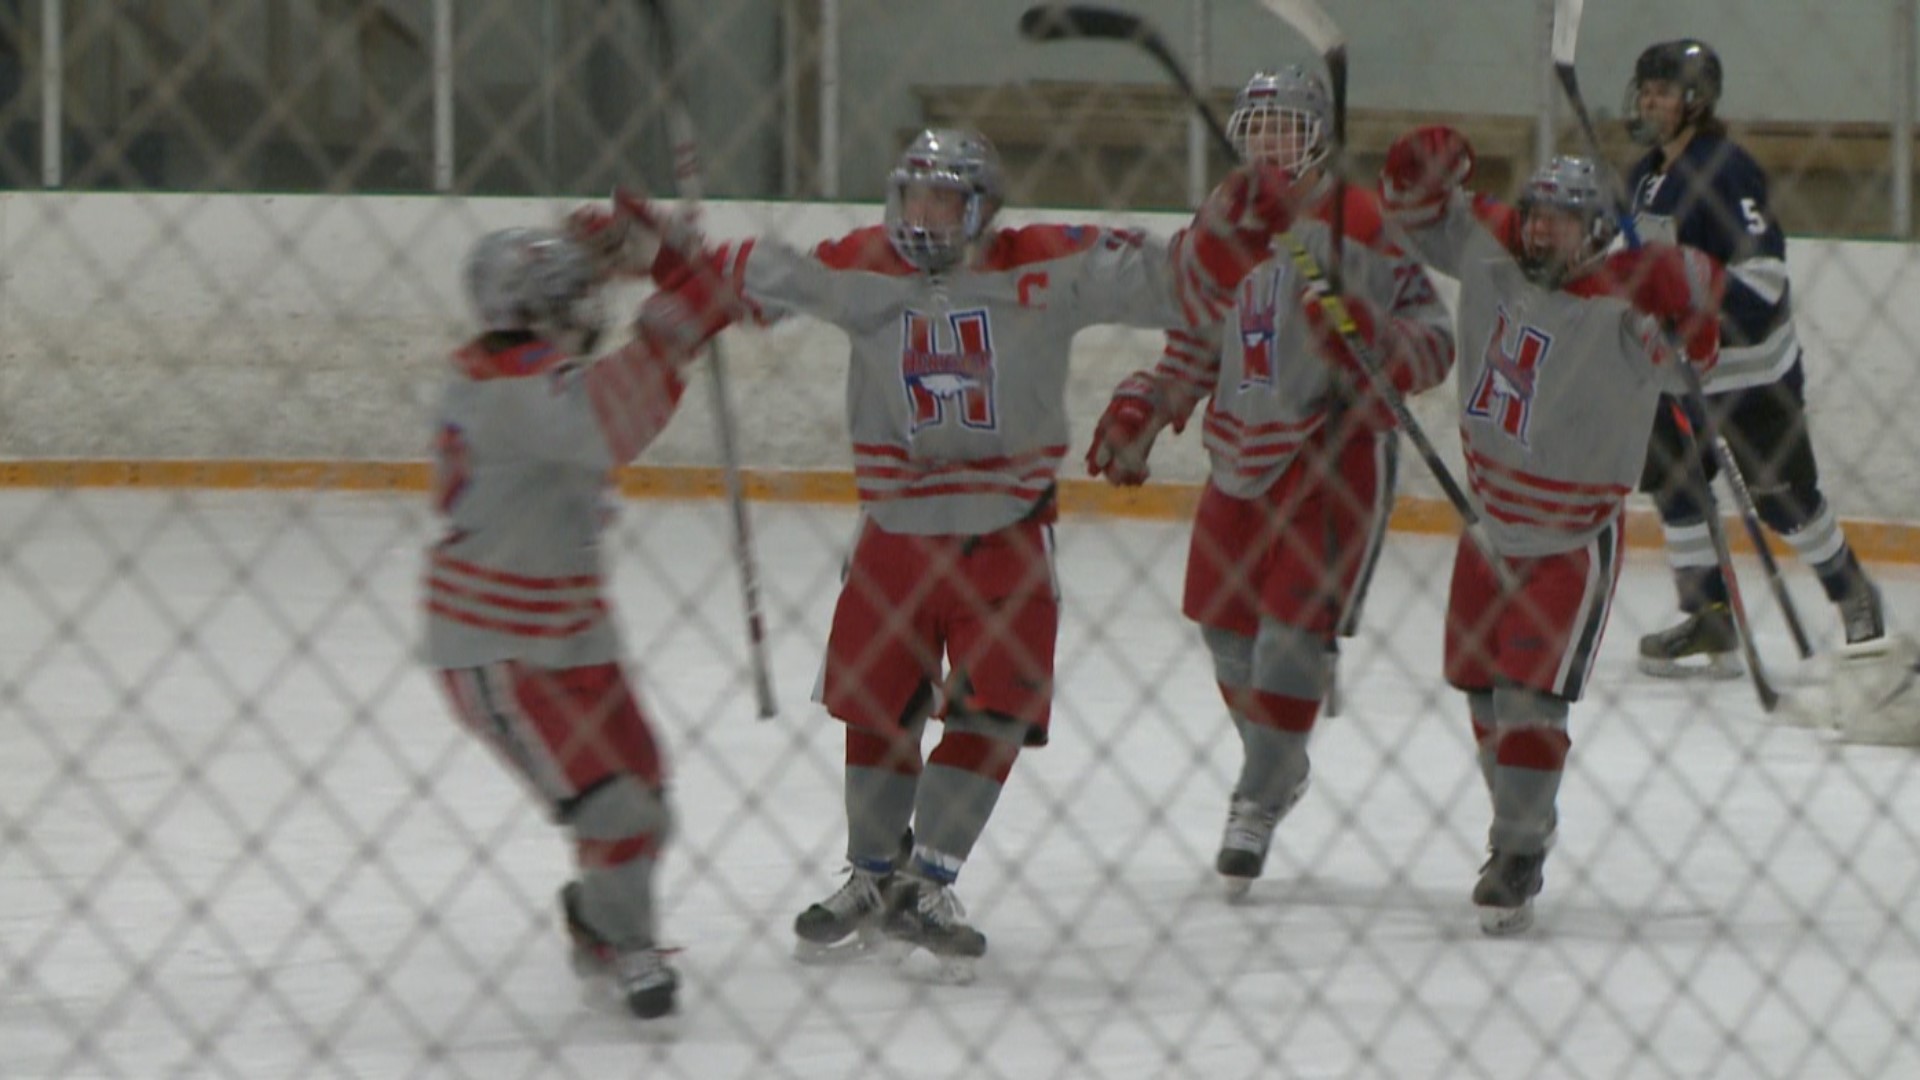 The Eagles defeated their Littleton rivals 6-3 at South Suburban Ice Arena on Thursday night.